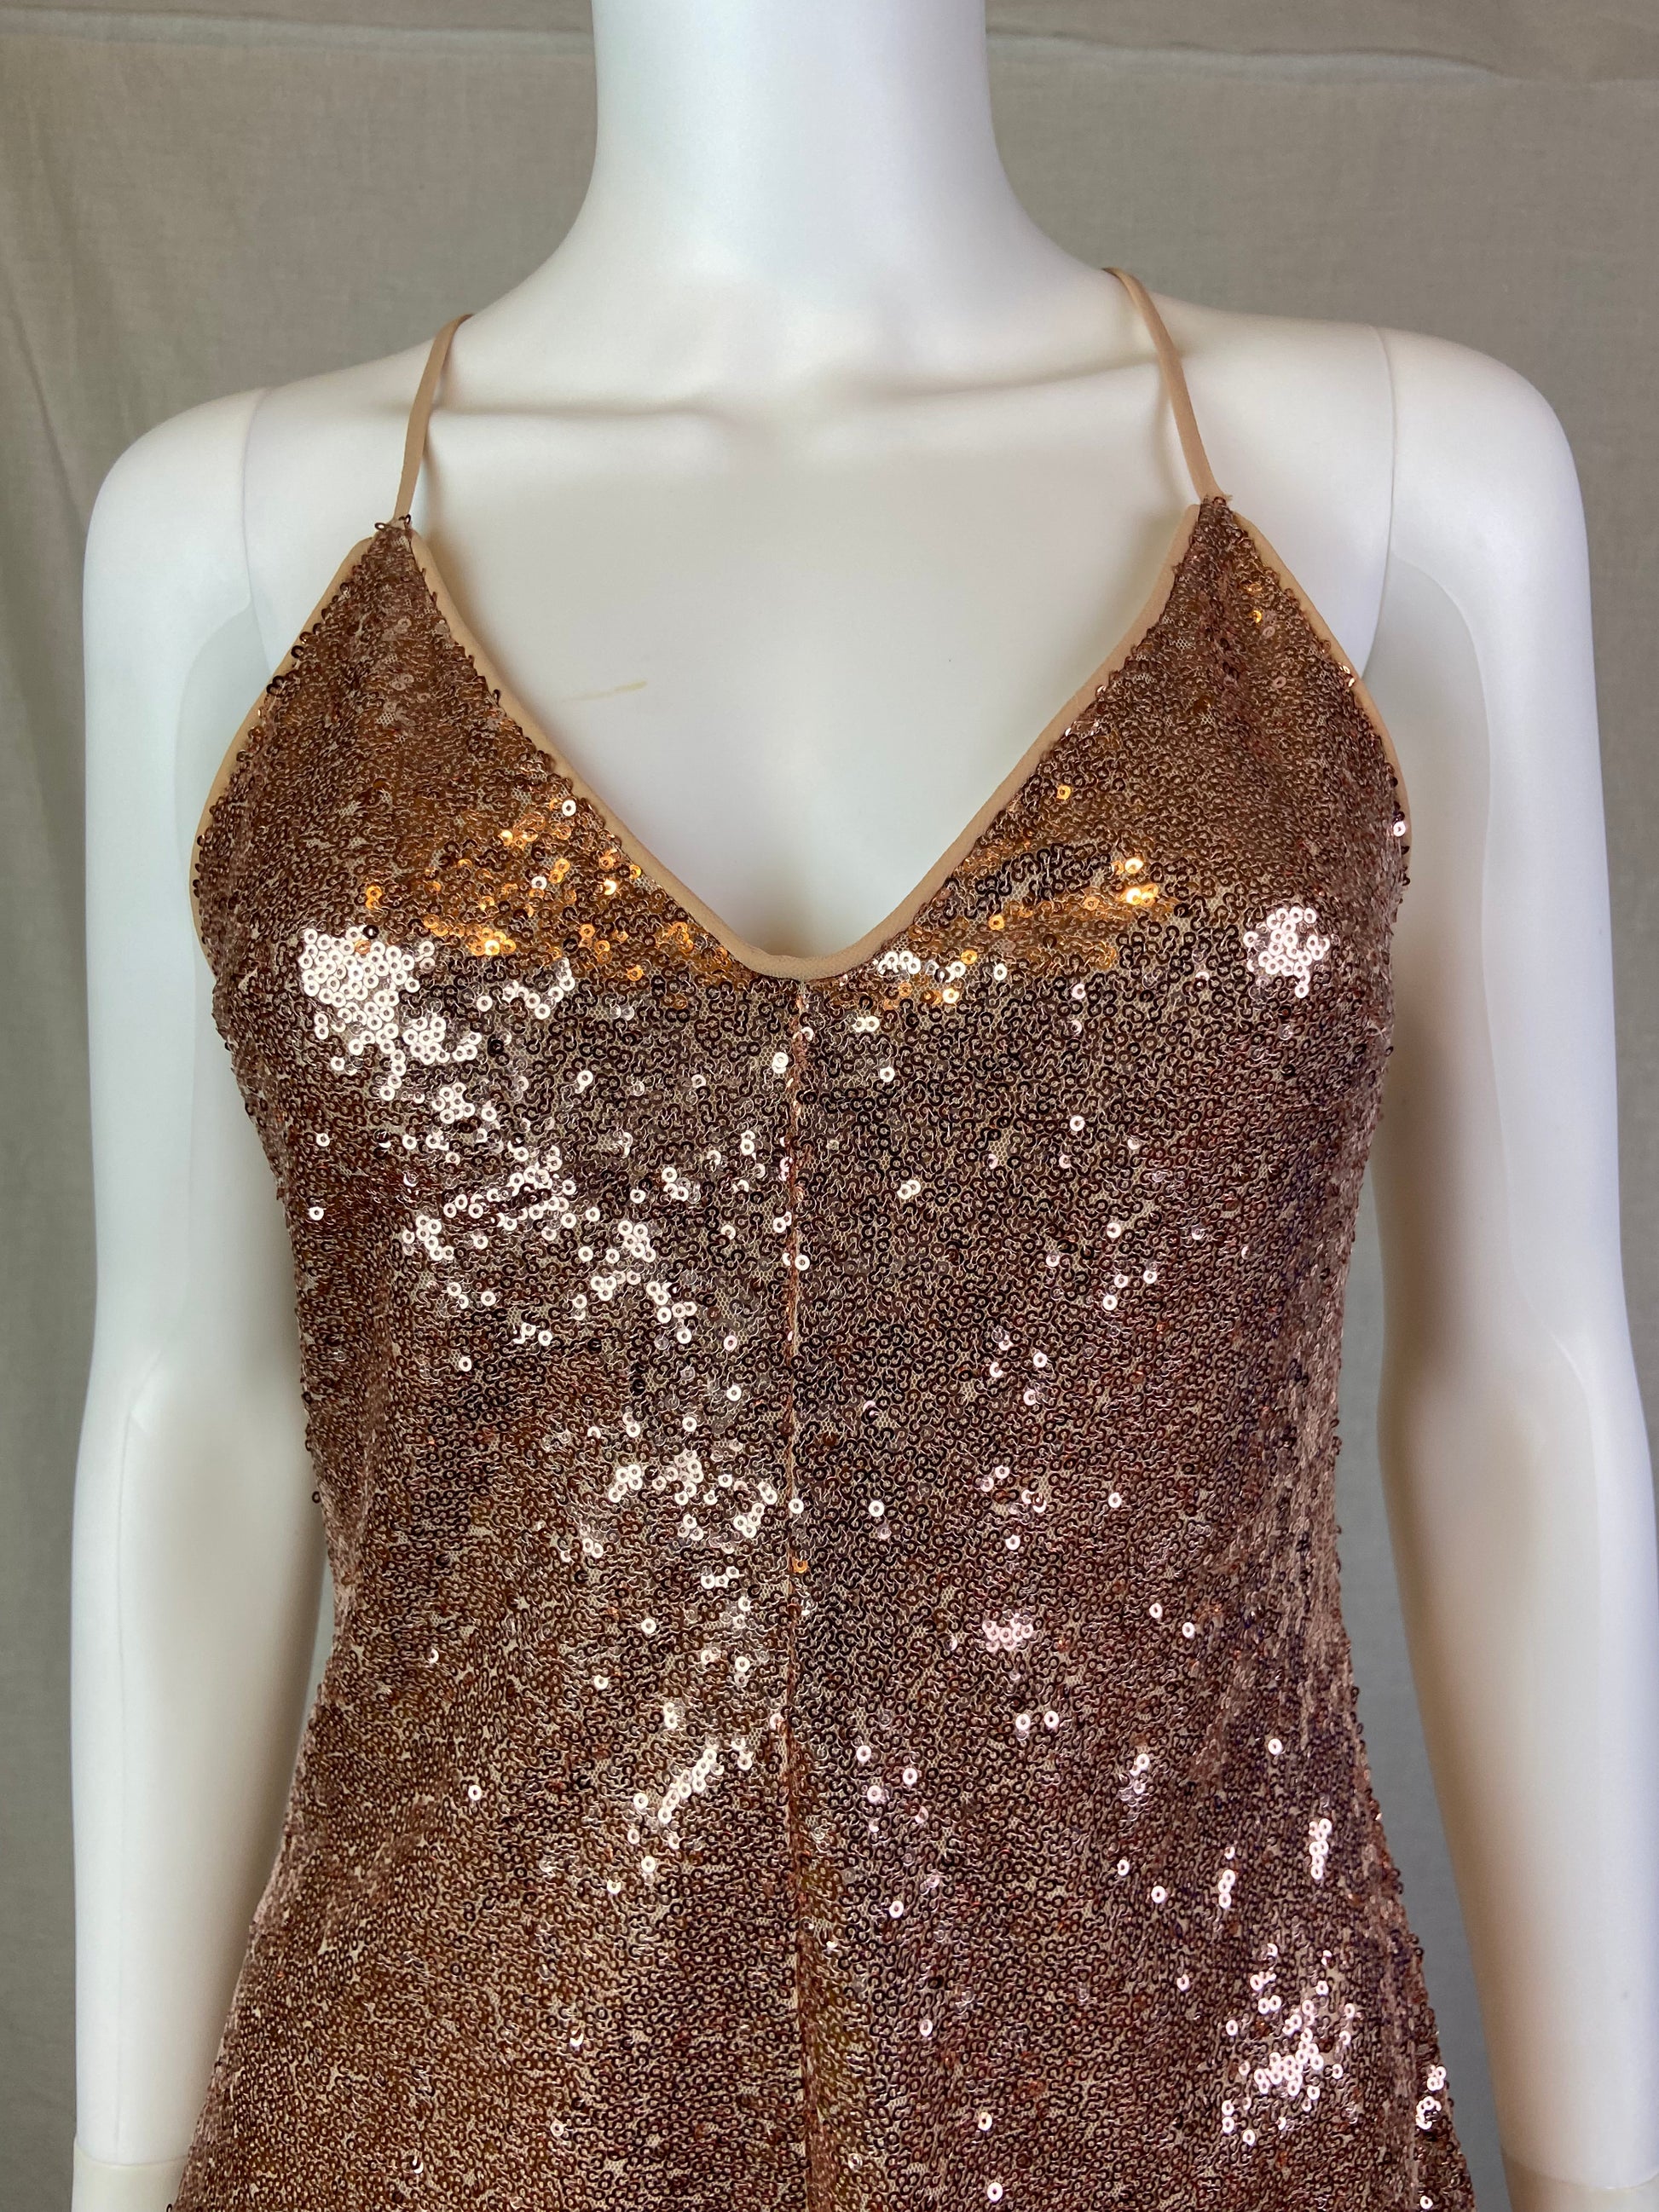 Forever 21 Champagne Gold Sequin Cocktail Shorts Romper ABBY ESSIE STUDIOS